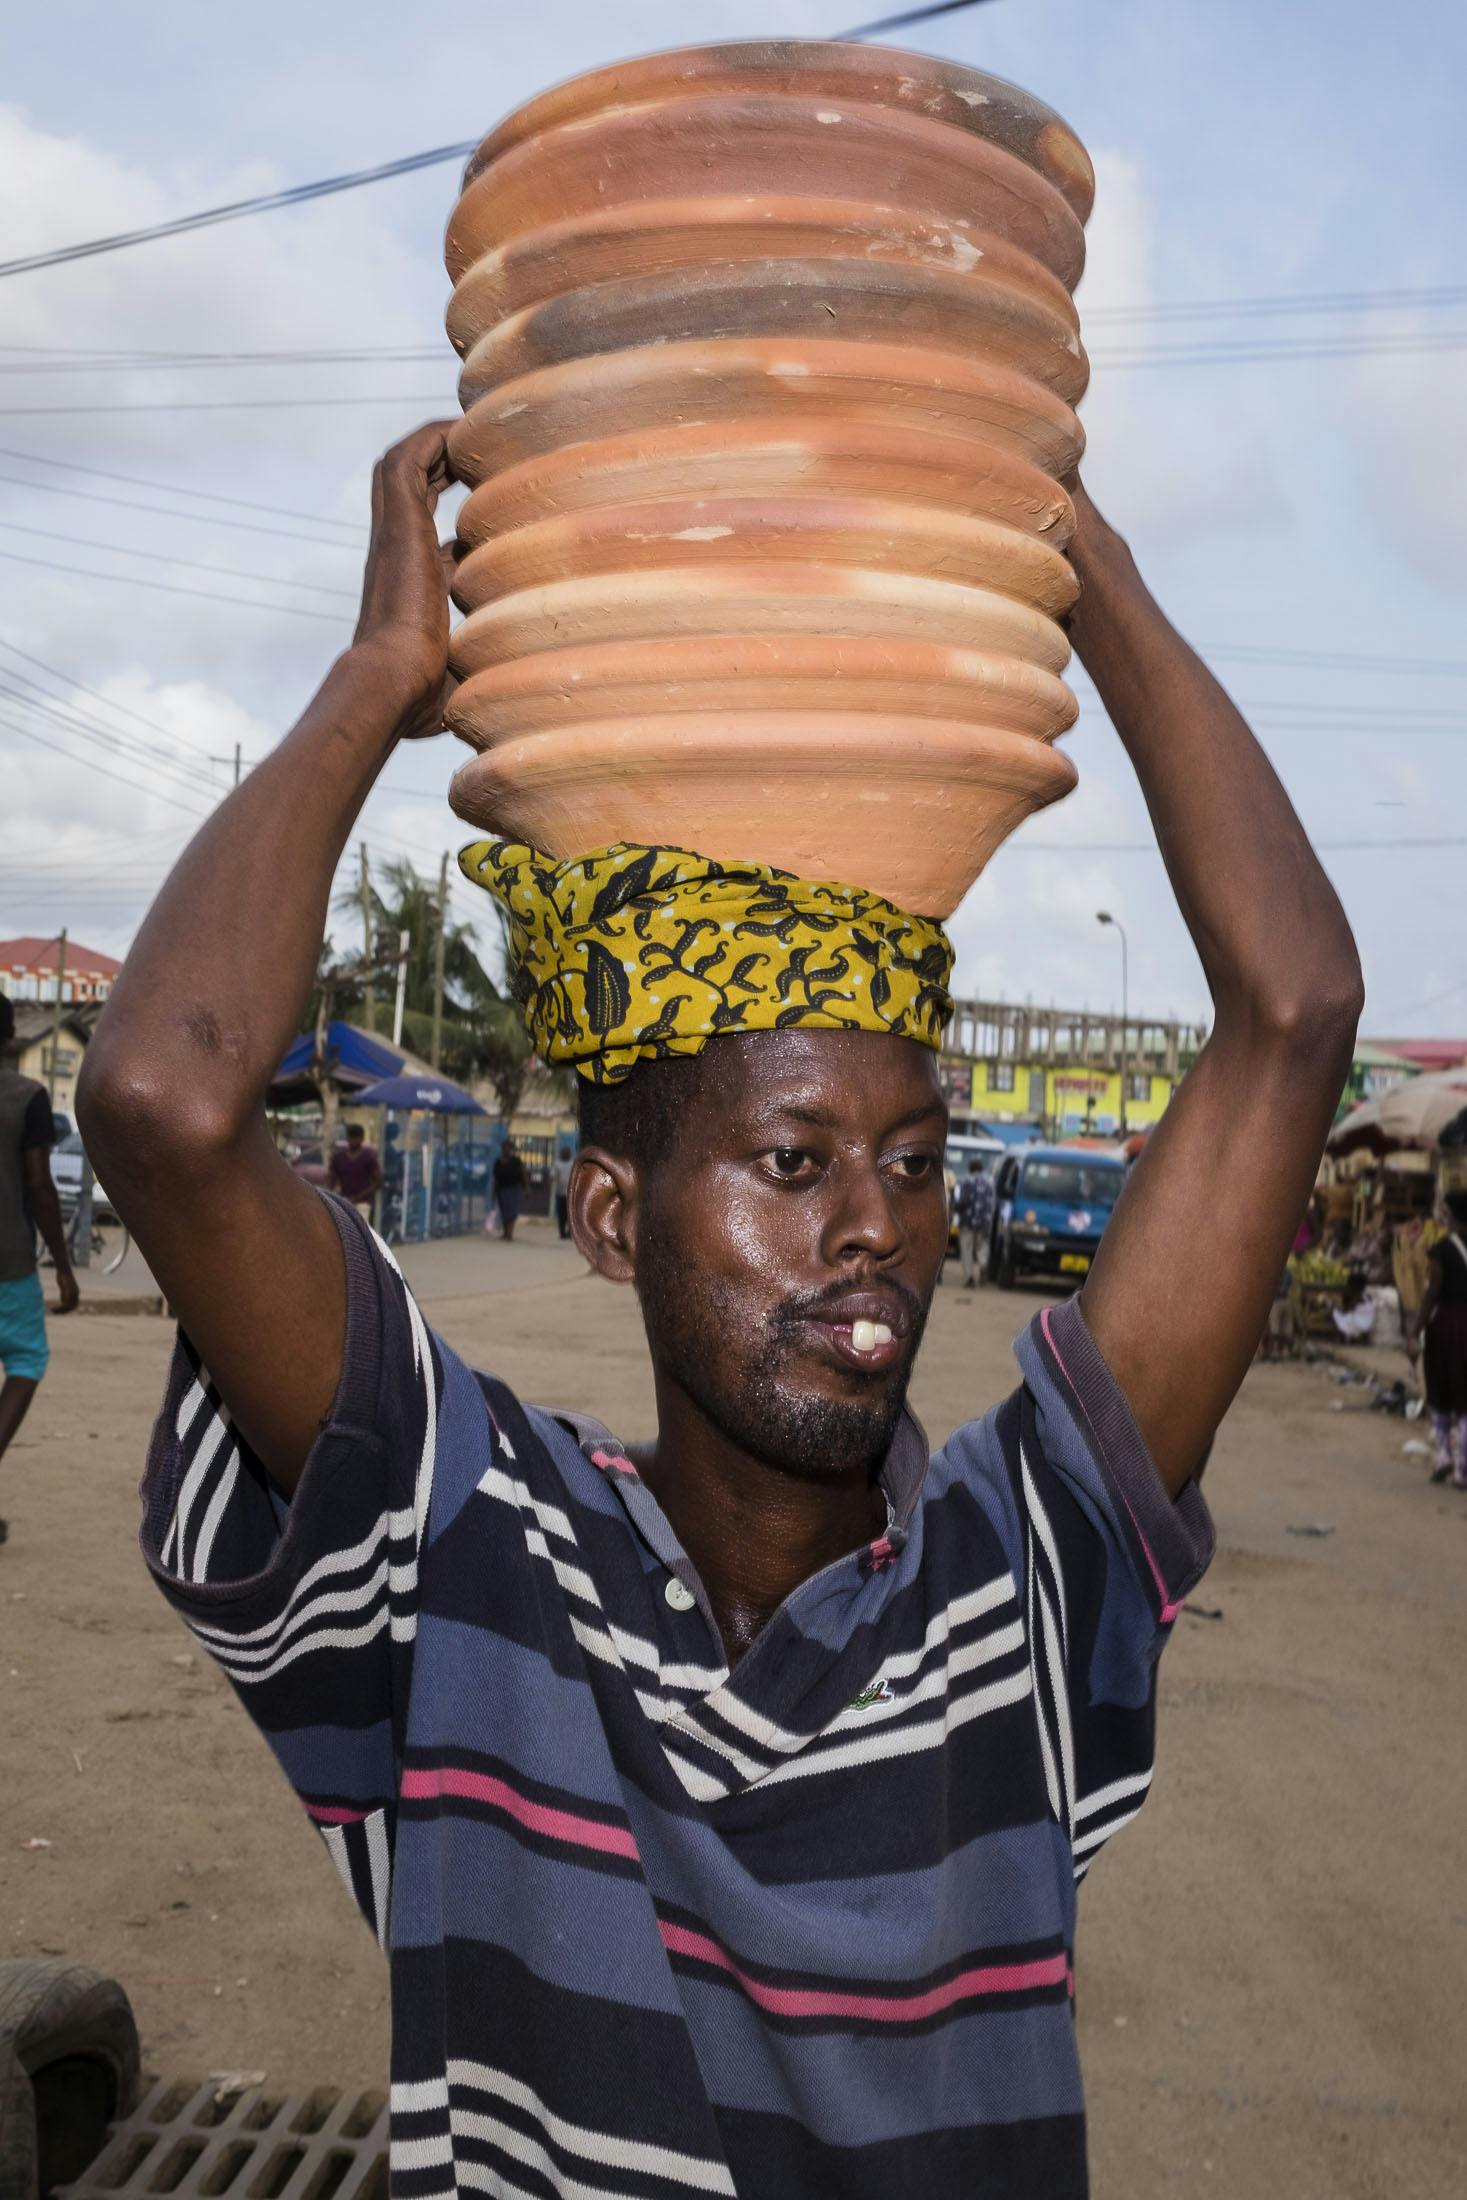 Man carrying pots on his head in Ghana